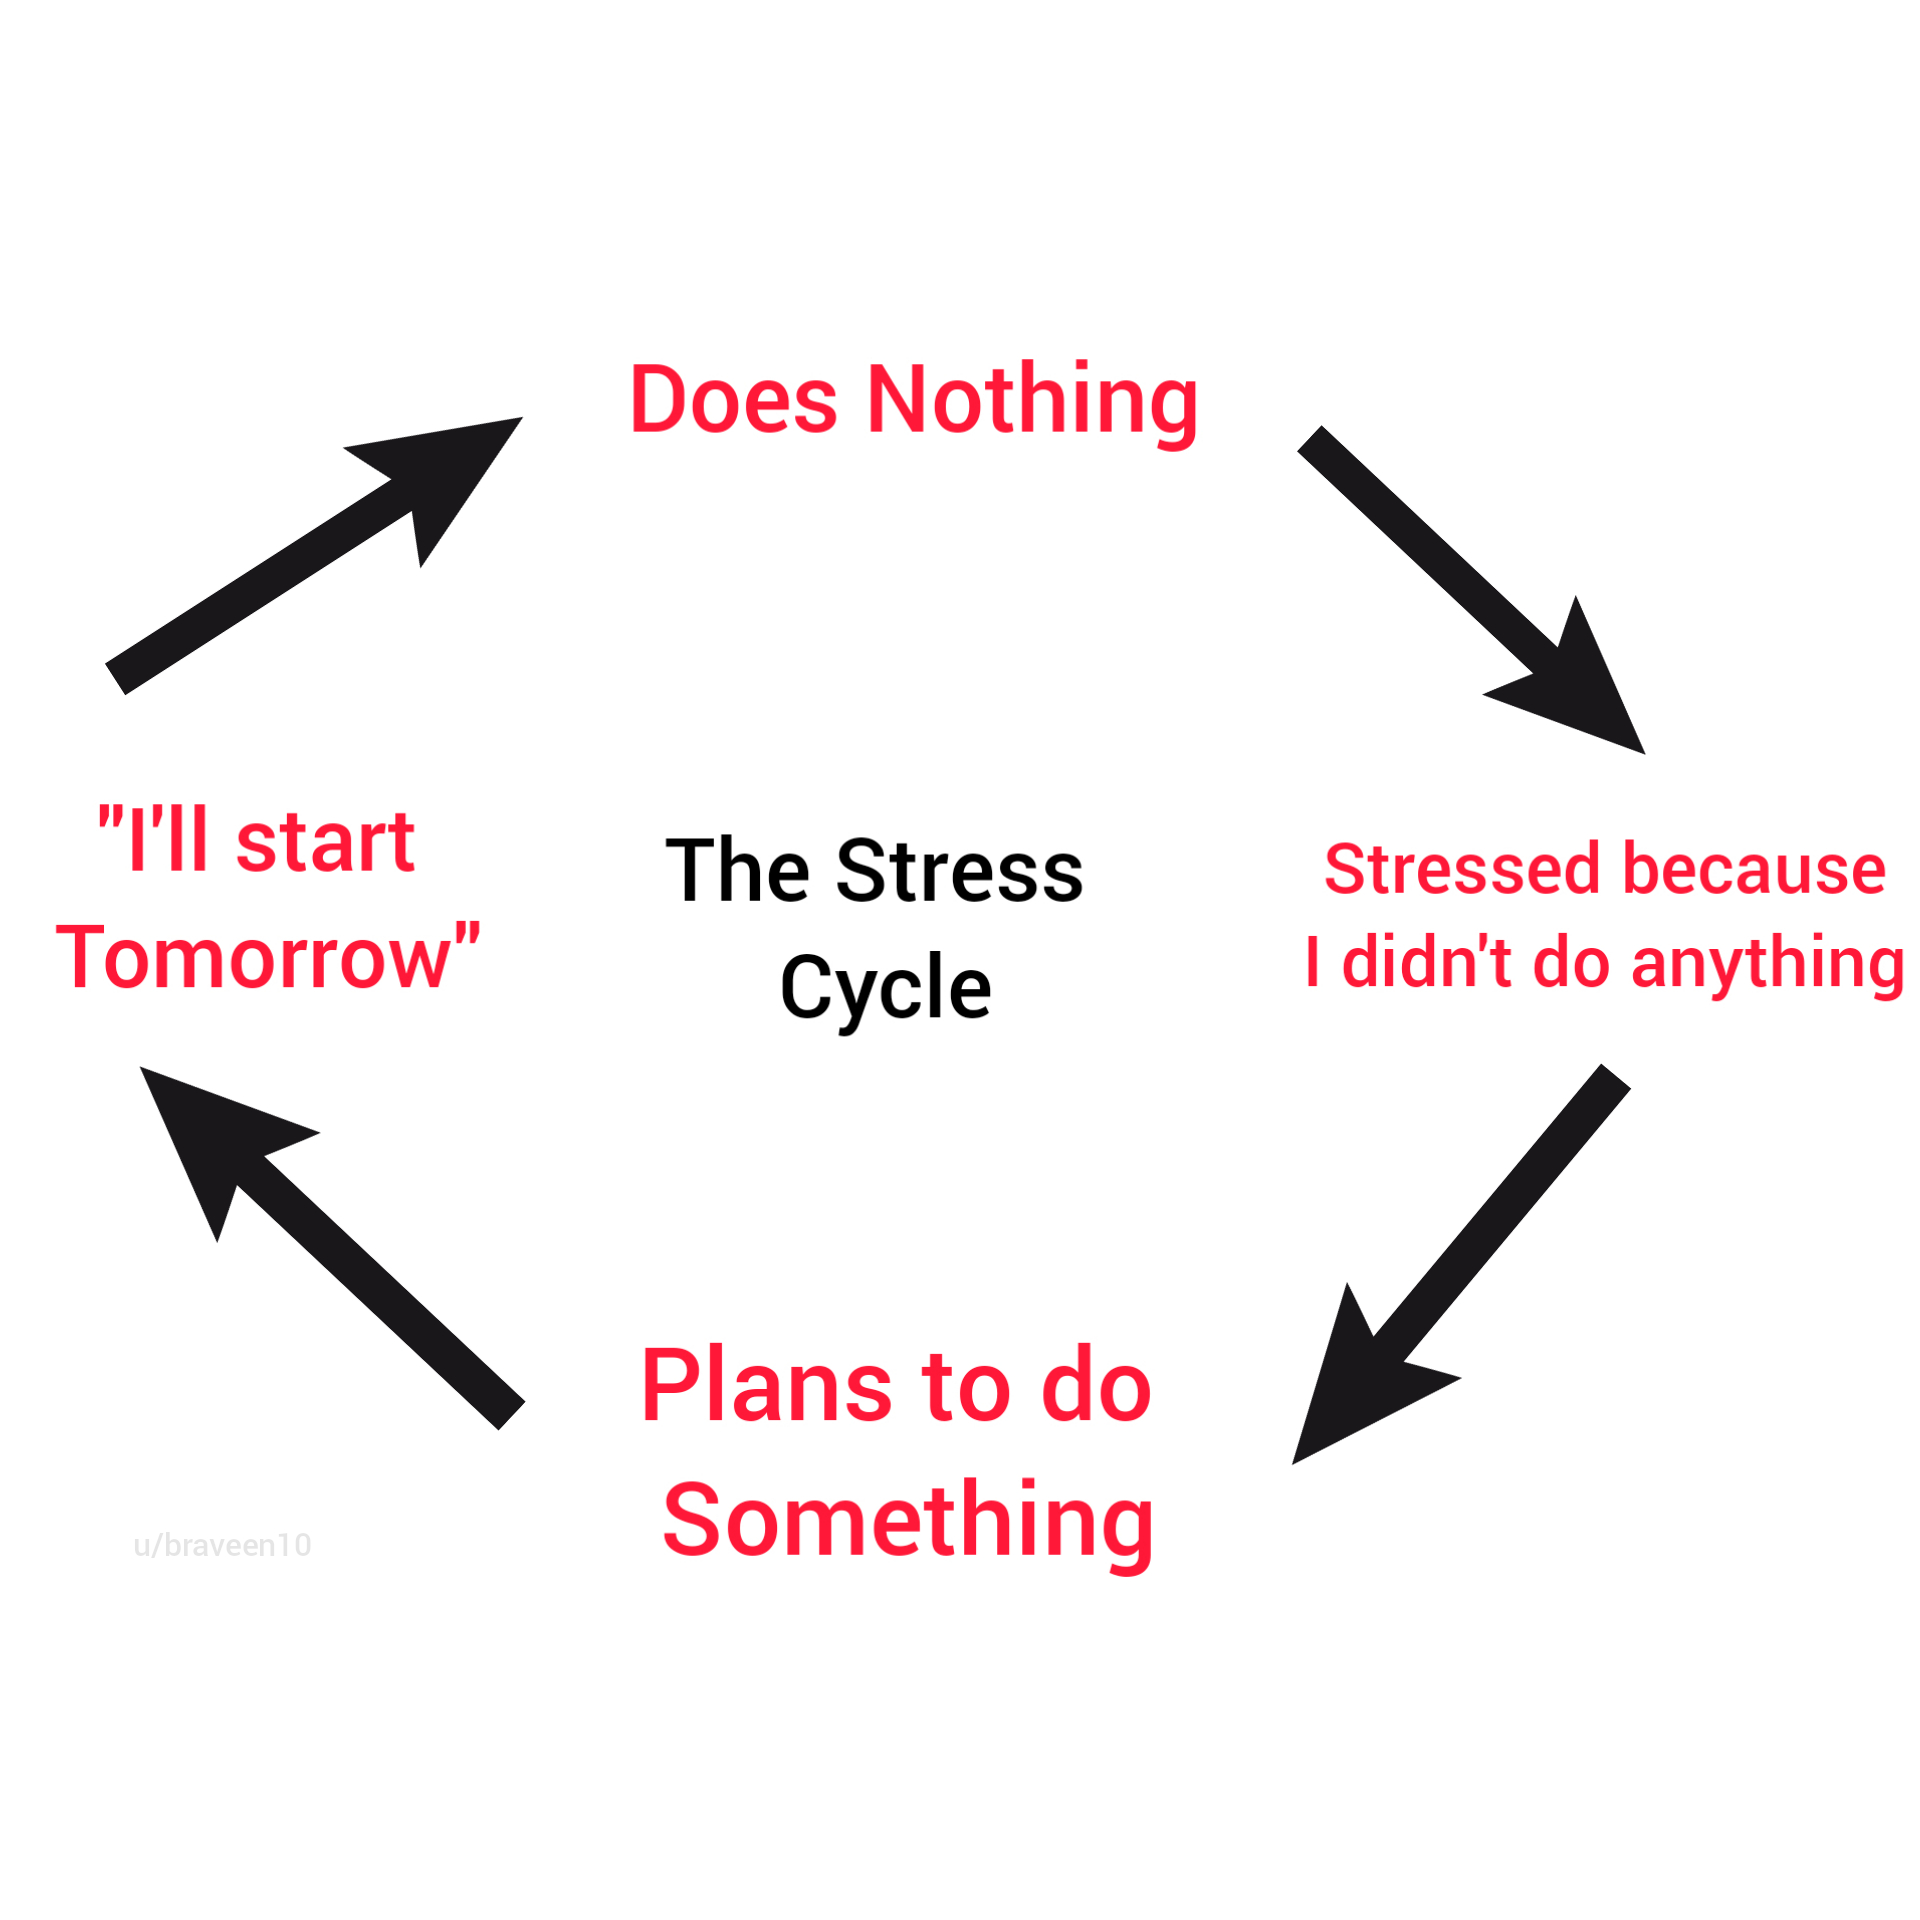 dank memes - funny memes - c# programming language - Does Nothing "I'll start Tomorrow" The Stress Cycle Stressed because I didn't do anything Plans to do Something